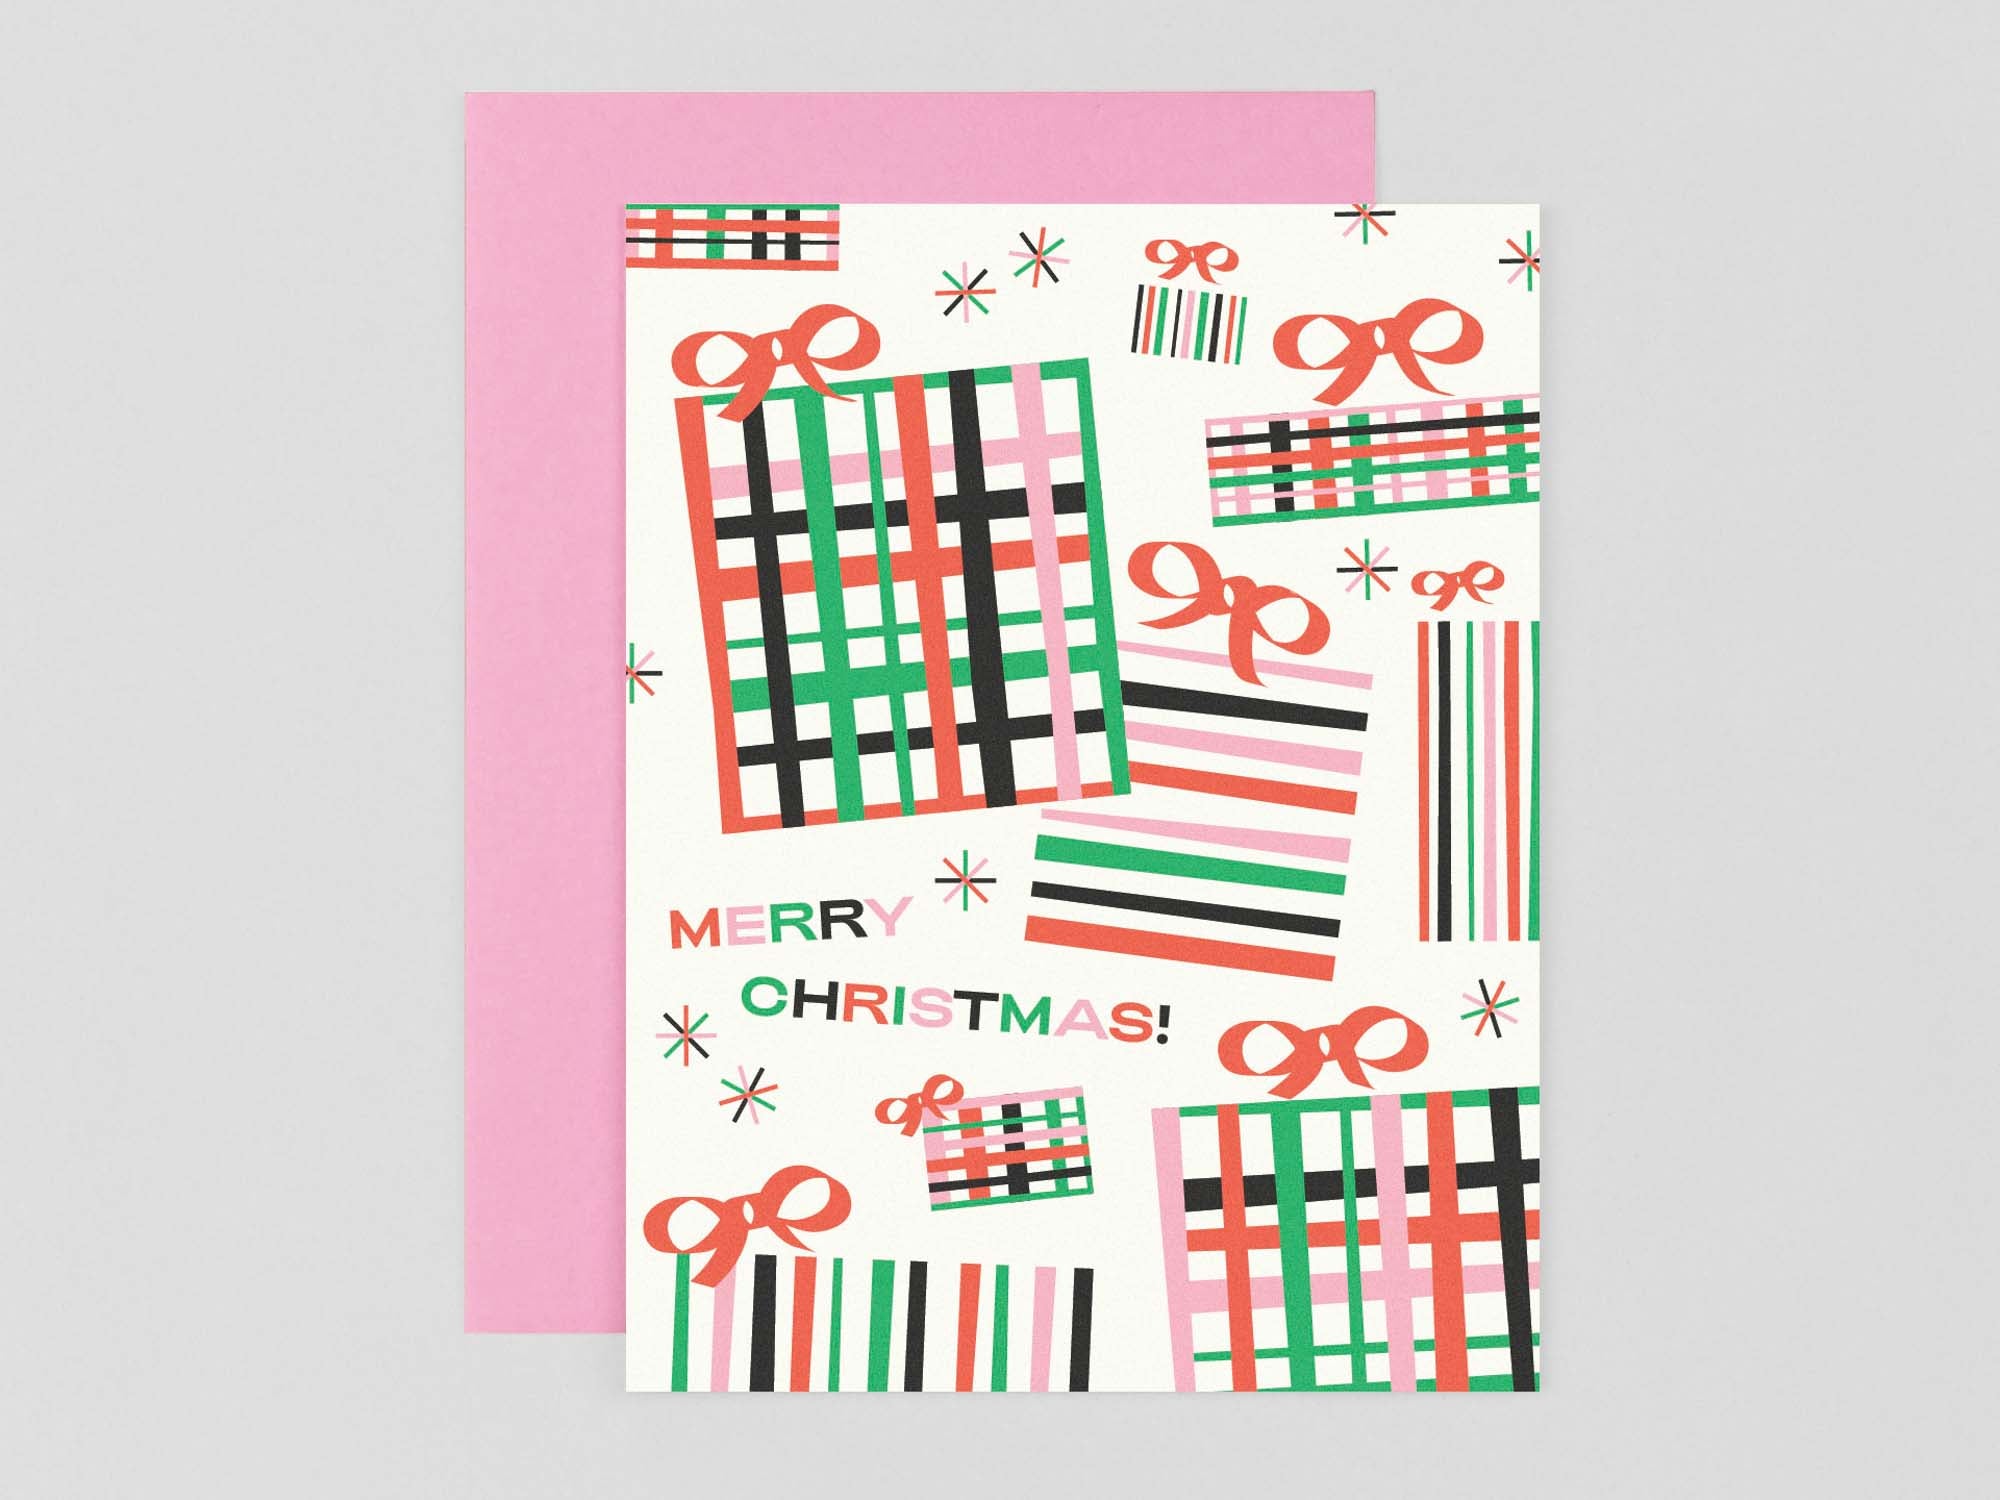 "Merry Christmas" mid-century inspired Christmas presents holiday cards with with a pile of bow-topped presents and twinkly stars. Made in USA by @mydarlin_bk